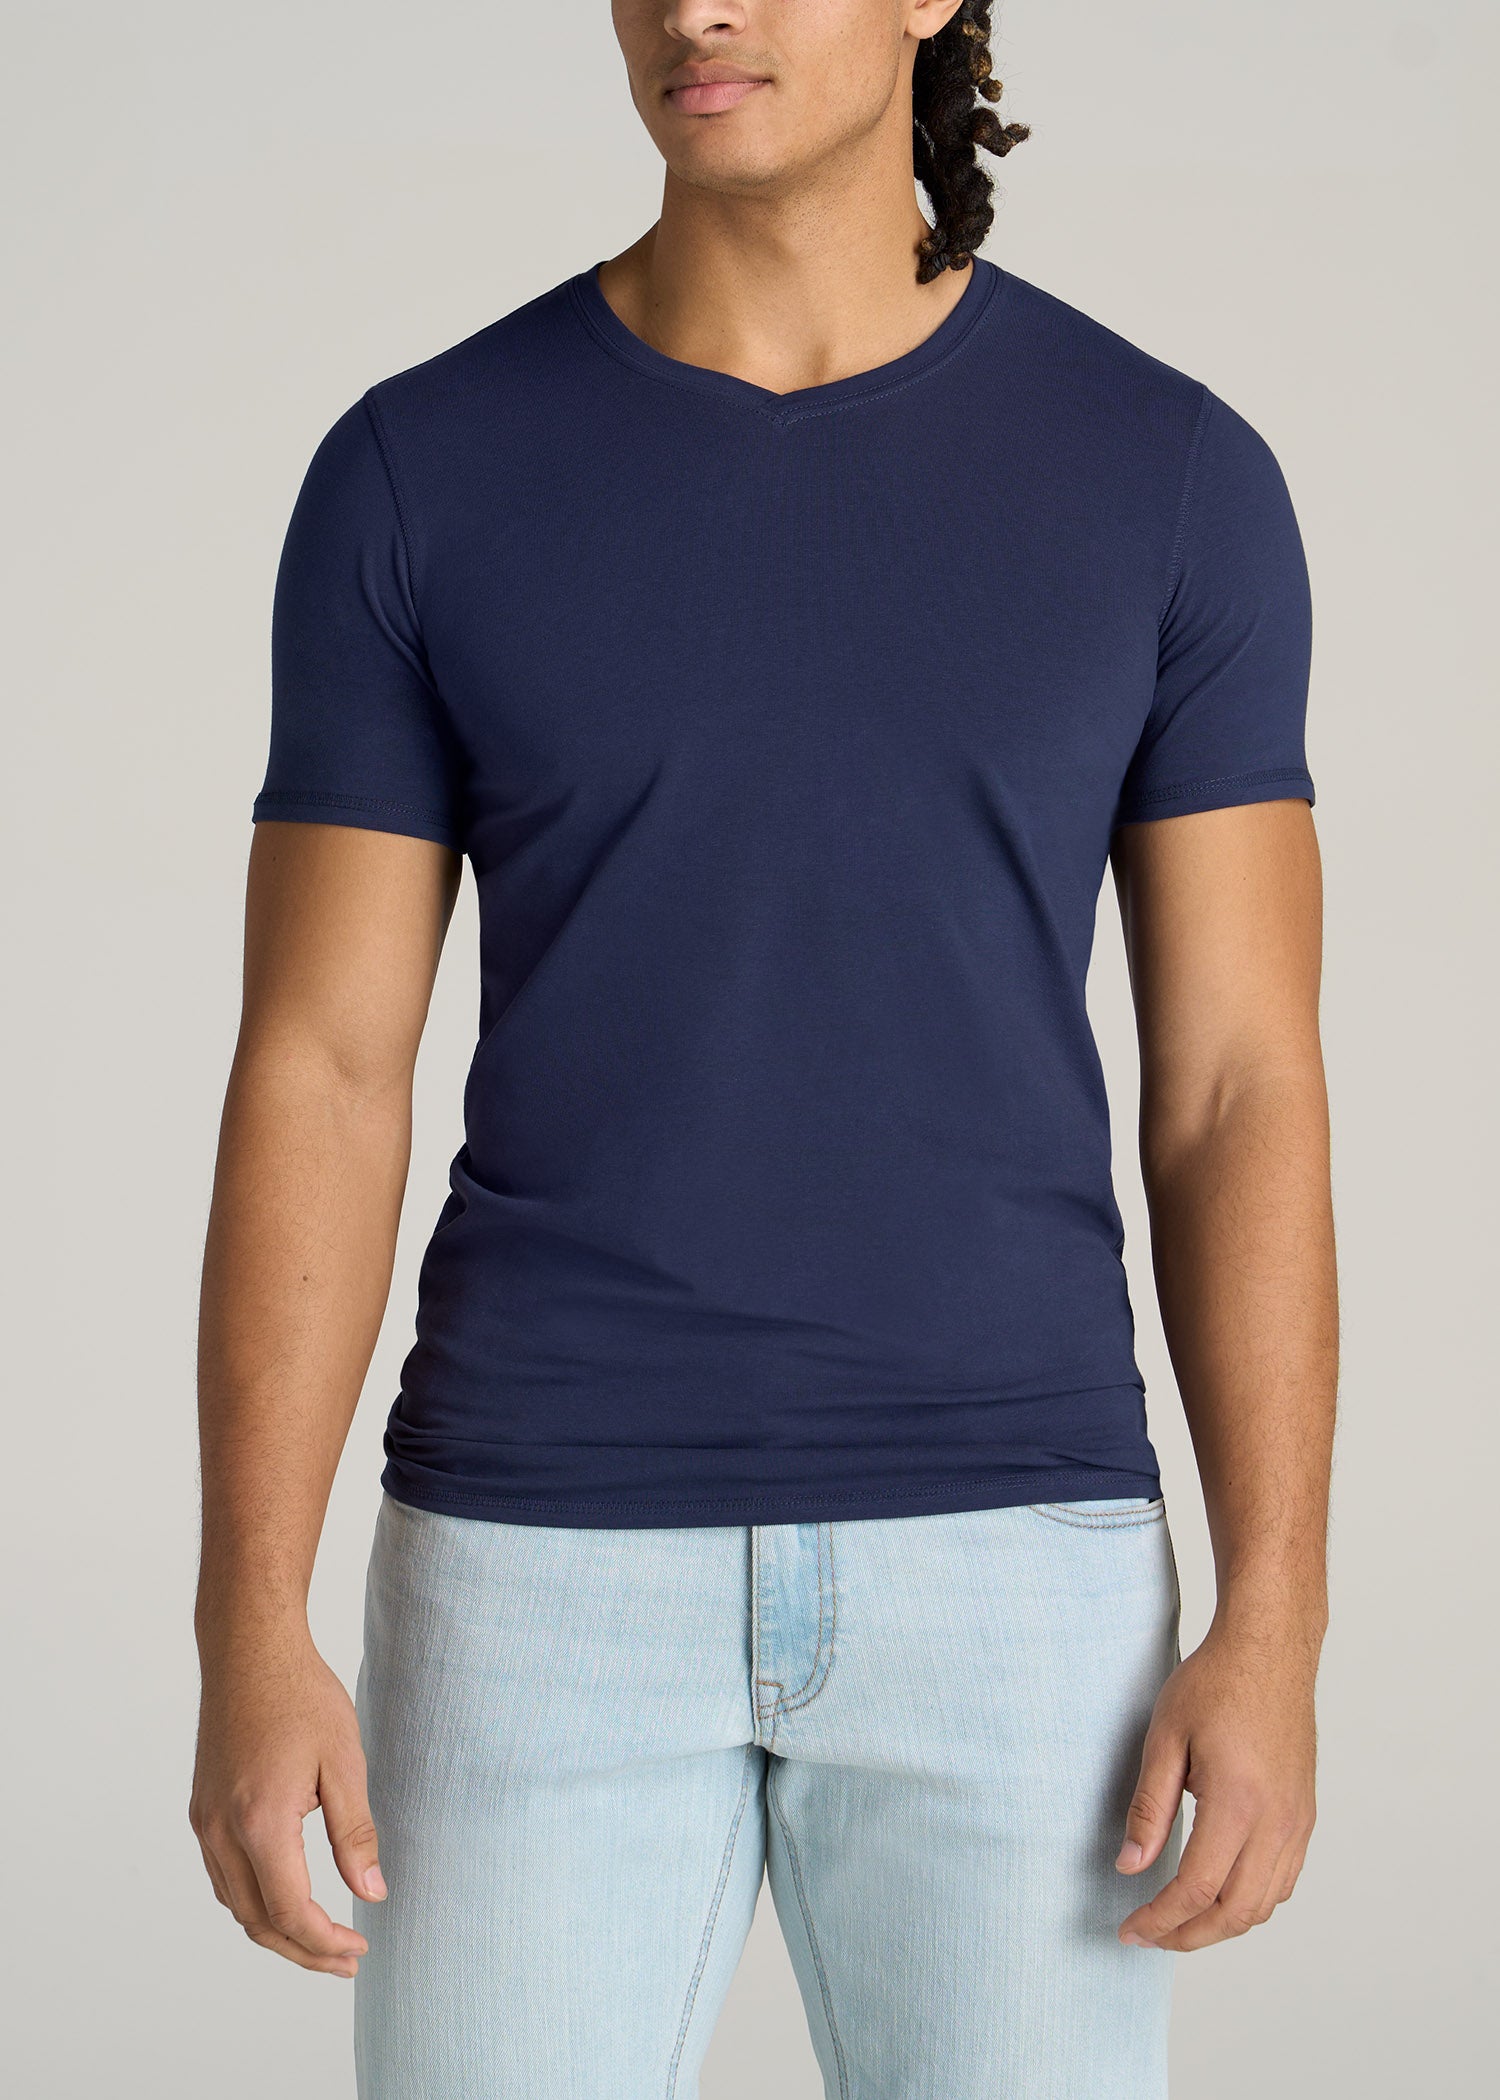    American-Tall-Men-Essential-SLIM-FIT-V-Neck-Tees-Navy-front